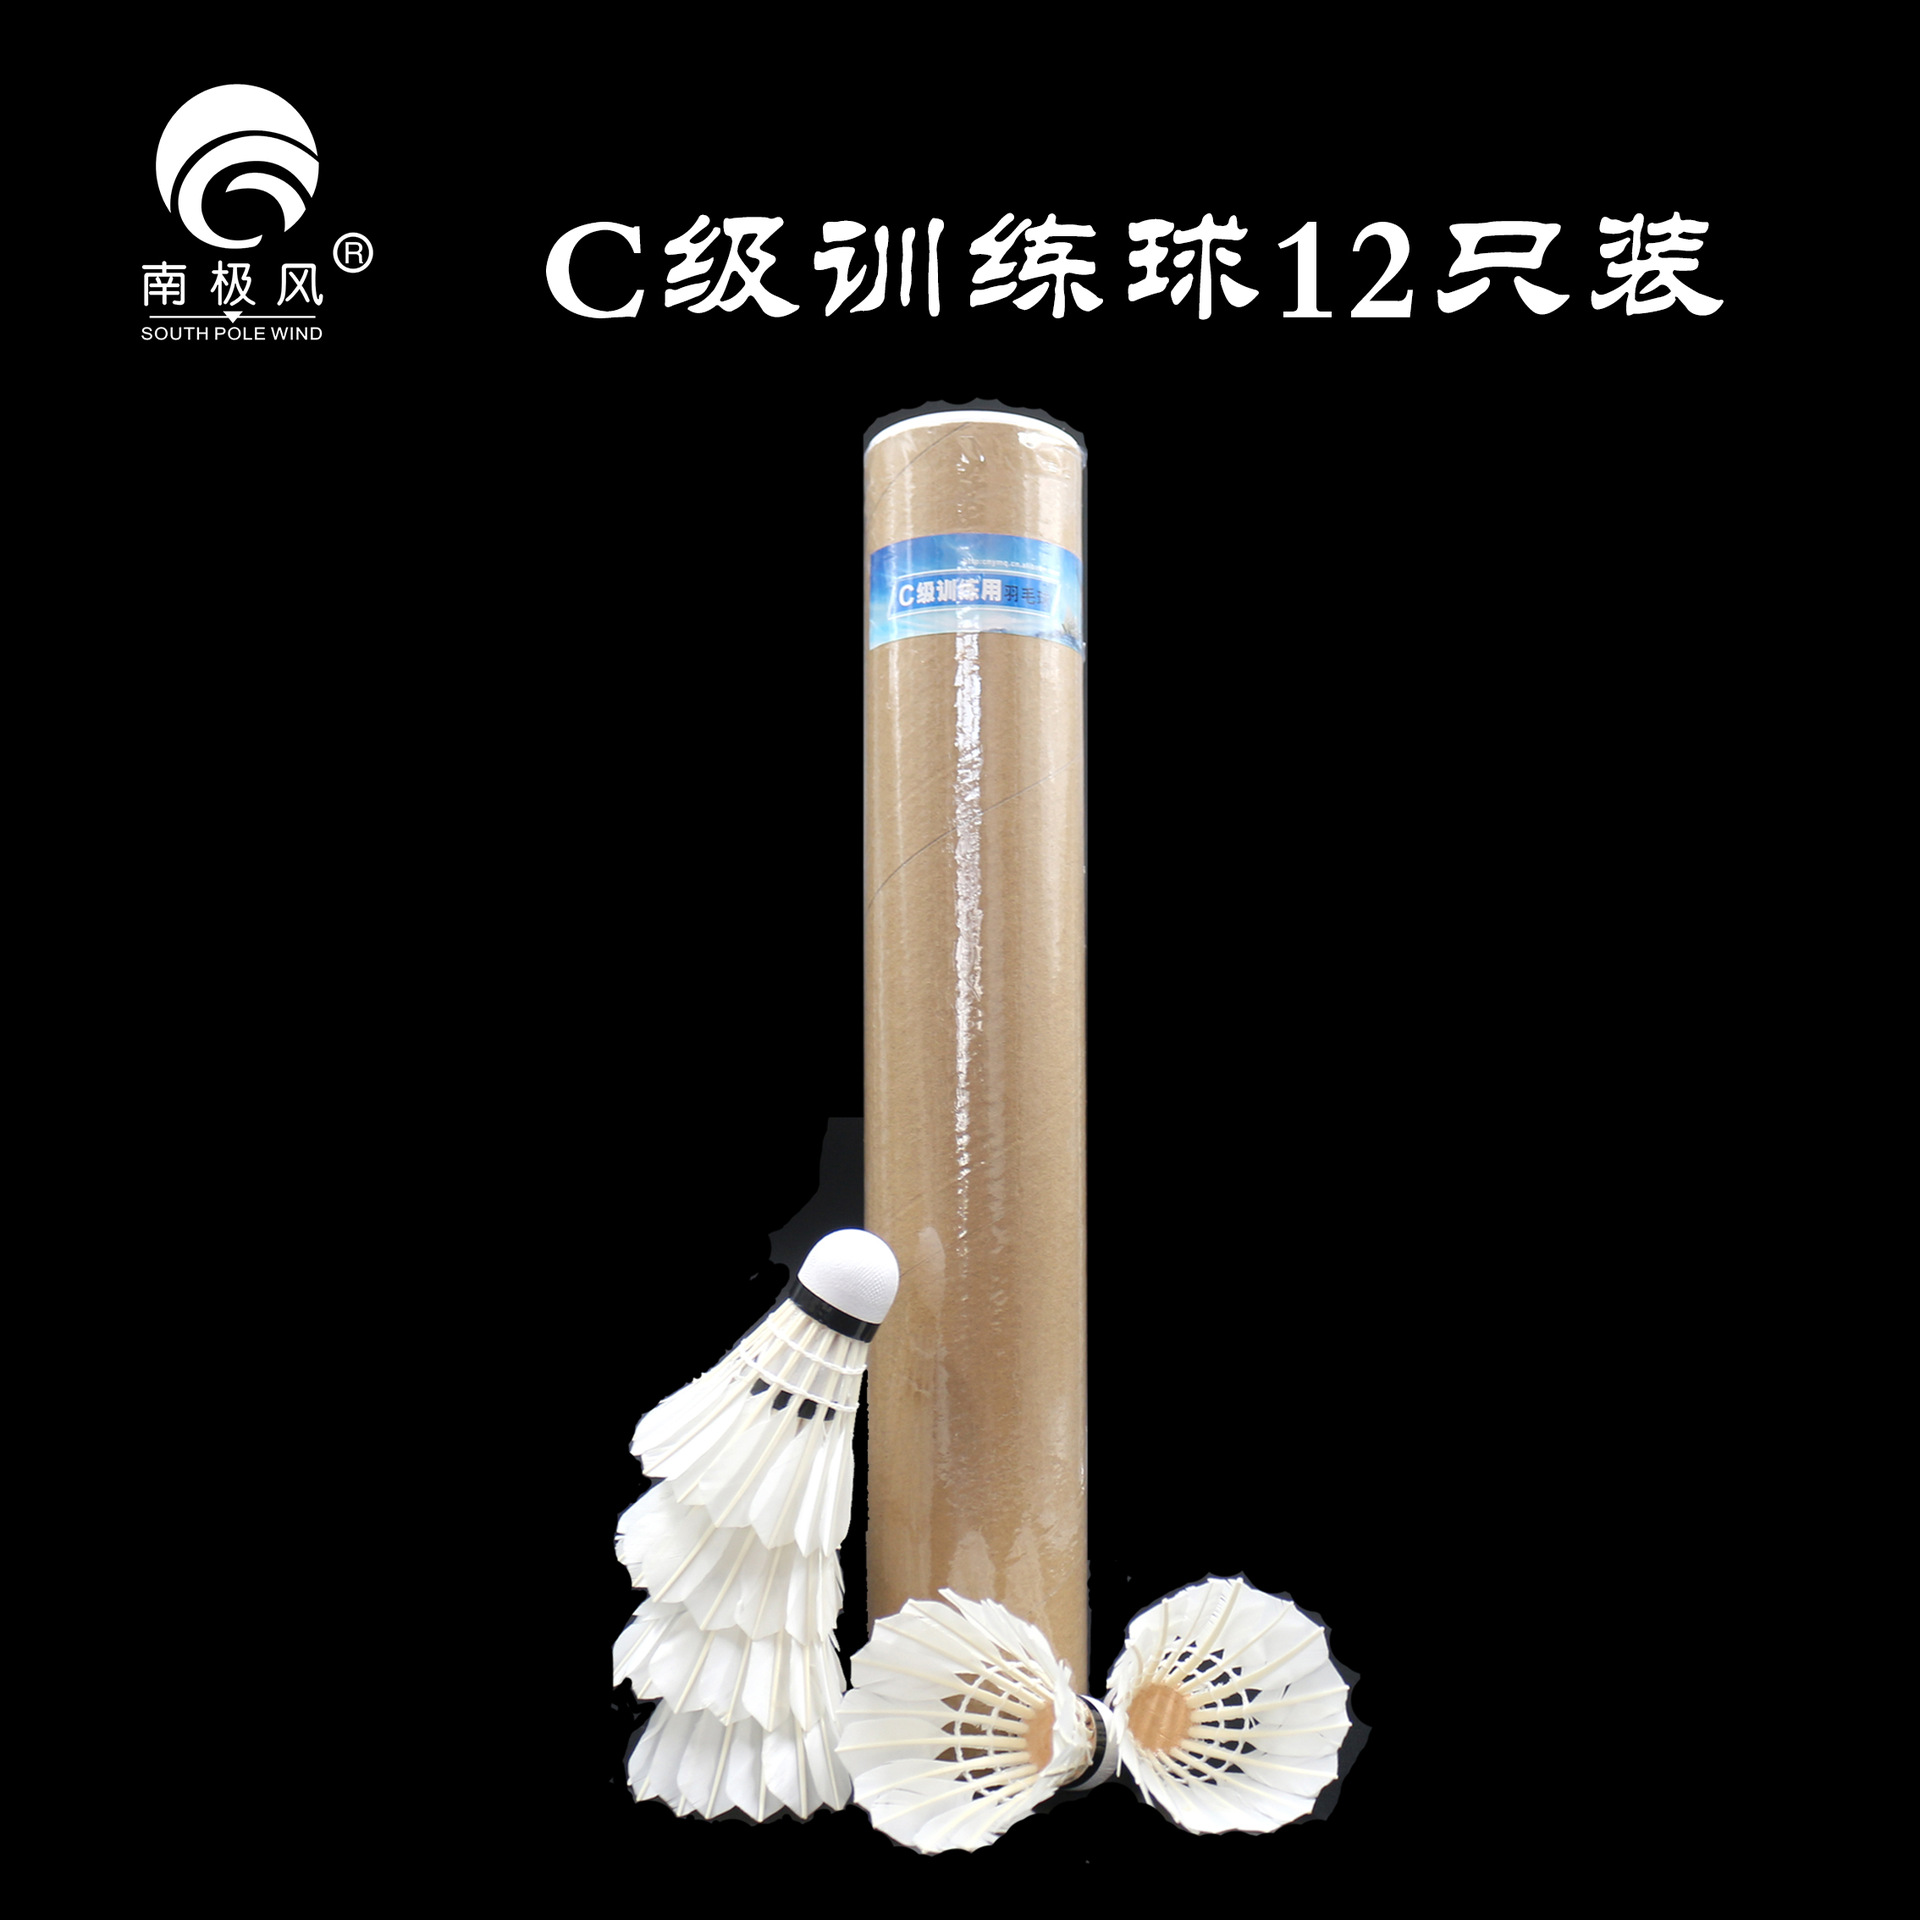 labeling processing wholesale js non-standard goose feather stable resistance training ball badminton 12 pack